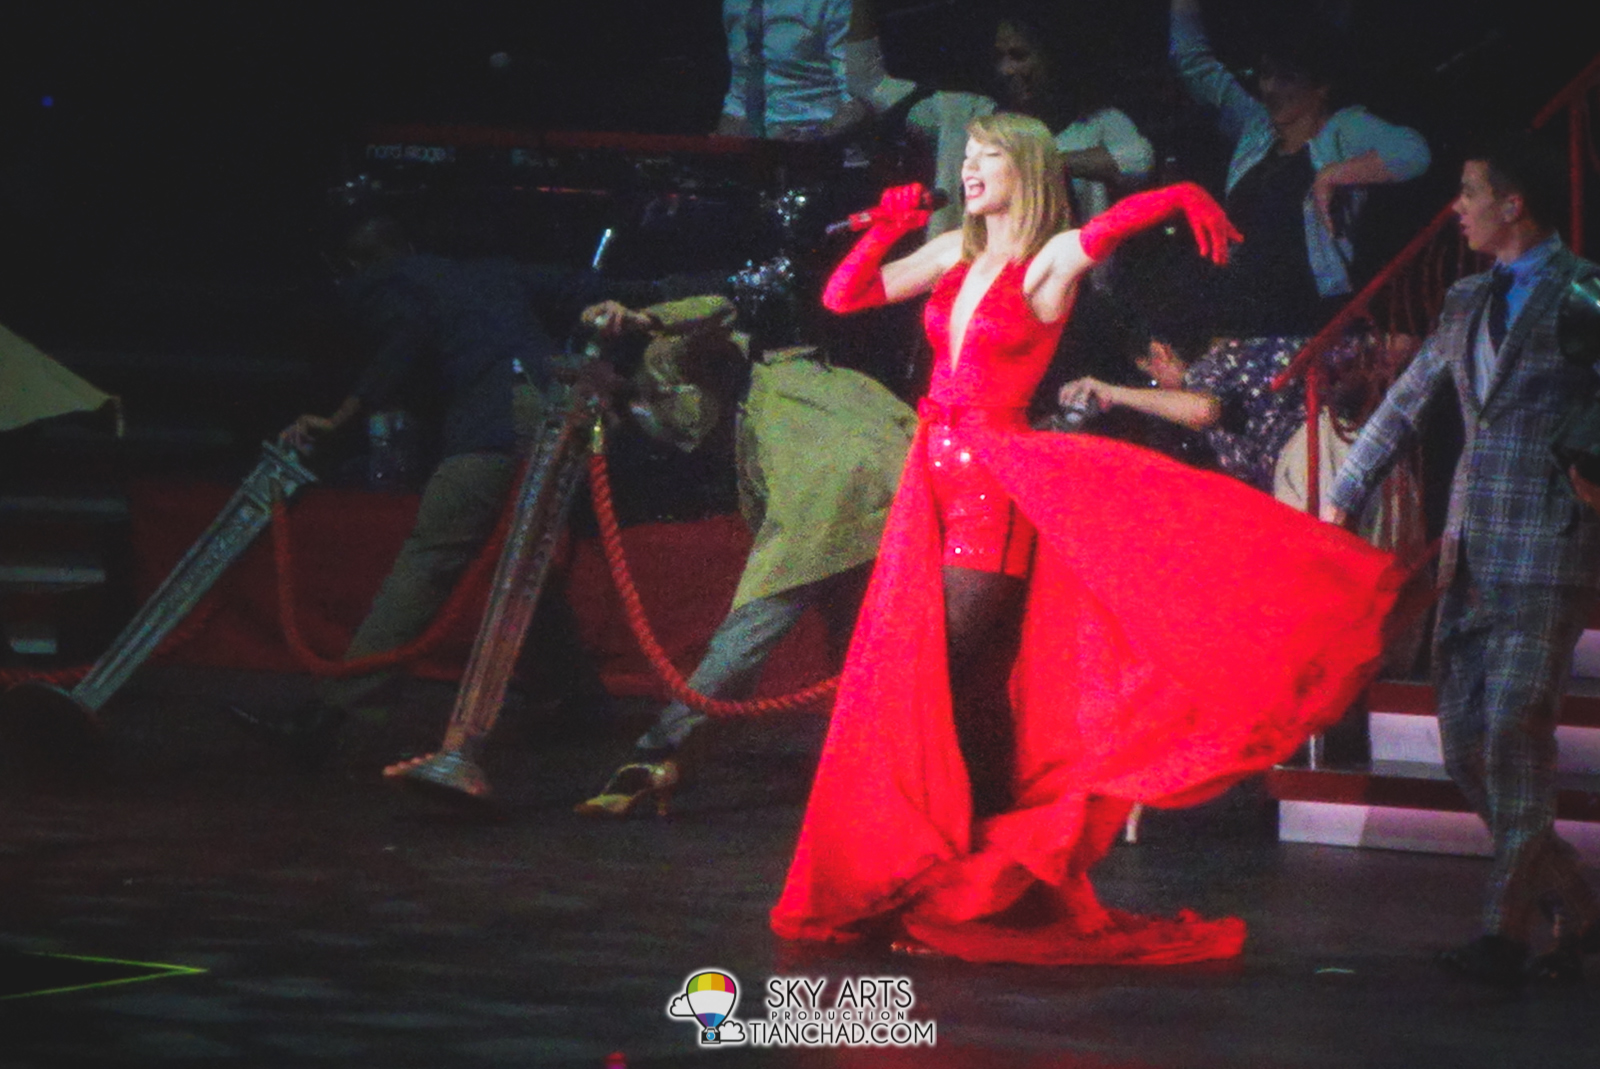 Taylor Swift can flaunt her RED Dress very well!